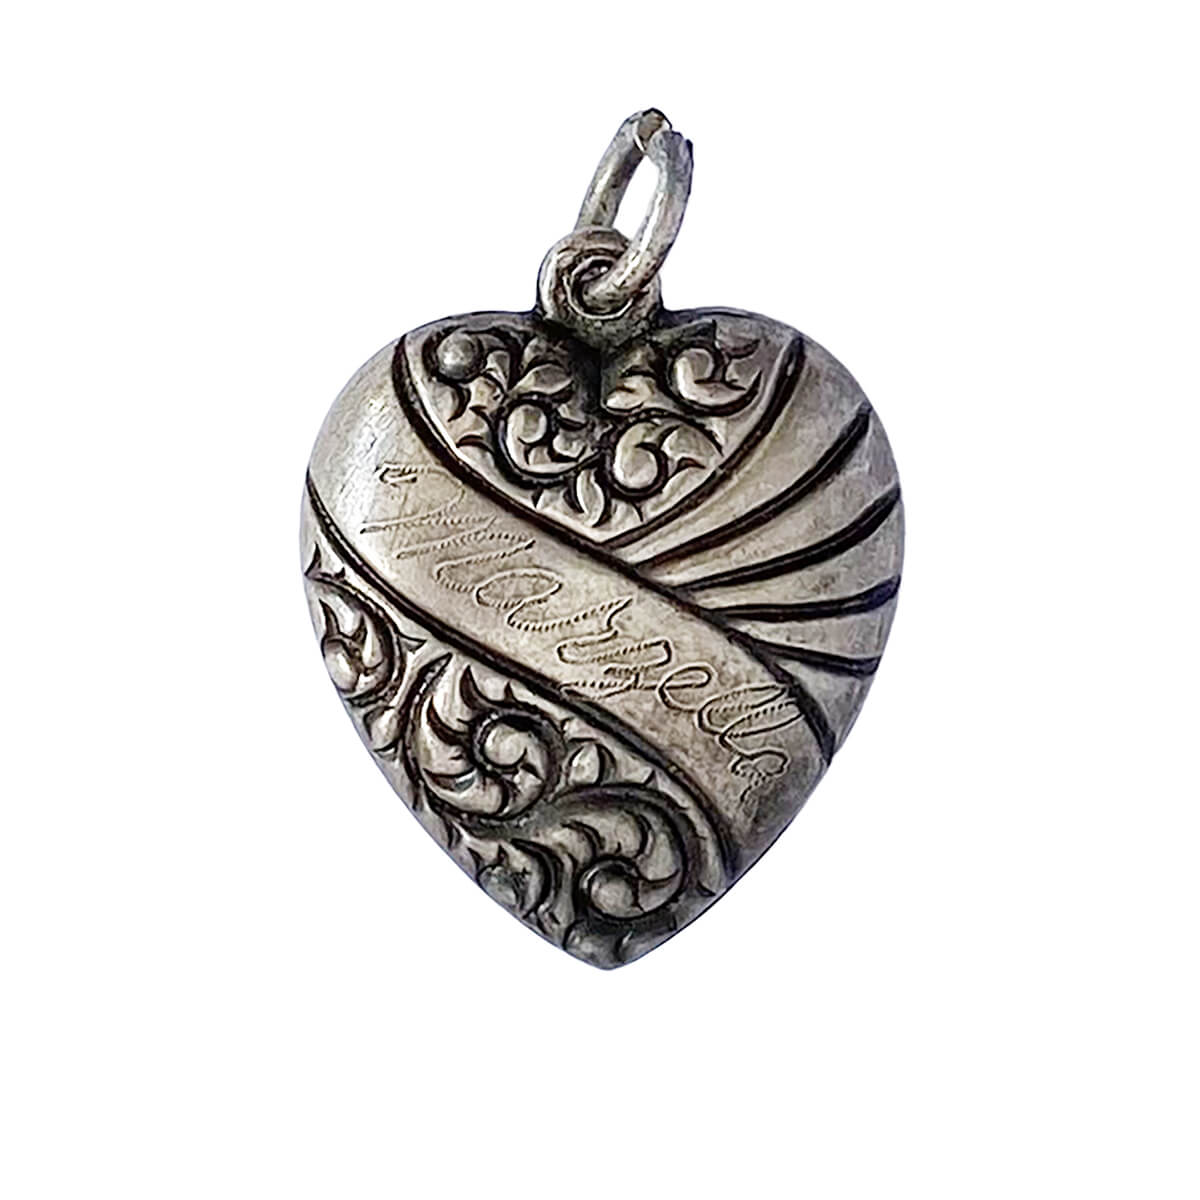 Sterling silver vintage puffy heart charm 1940s engraved pattern